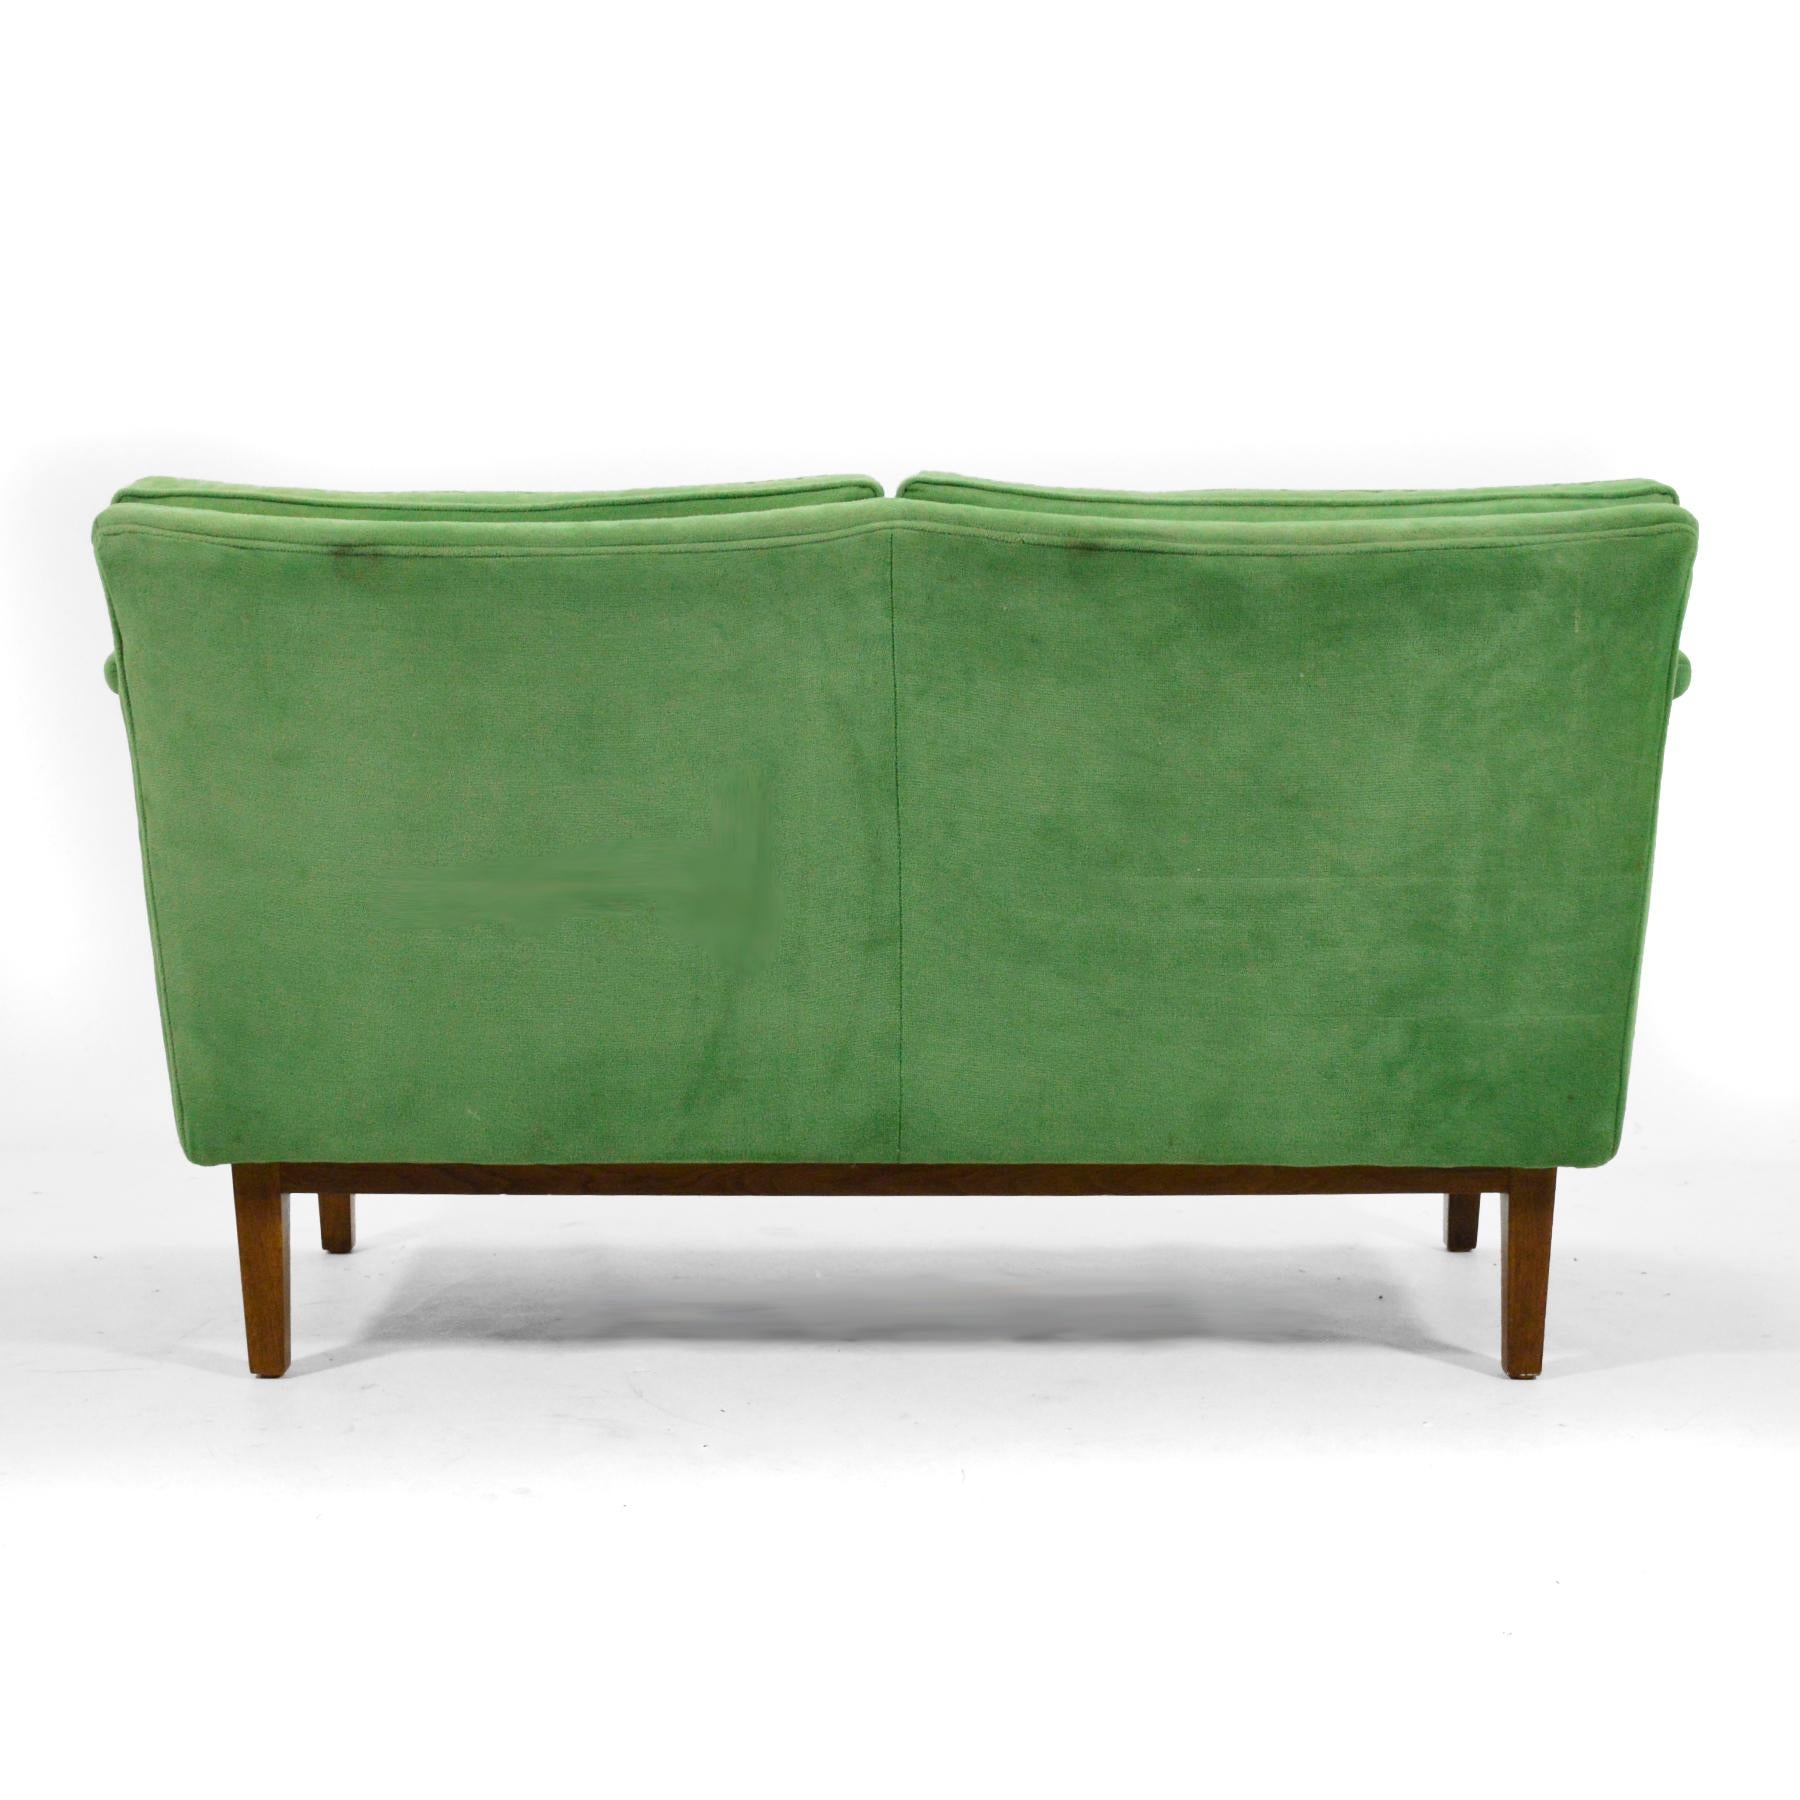 Edward Wormley Pair of Sofas / Settees For Sale 1